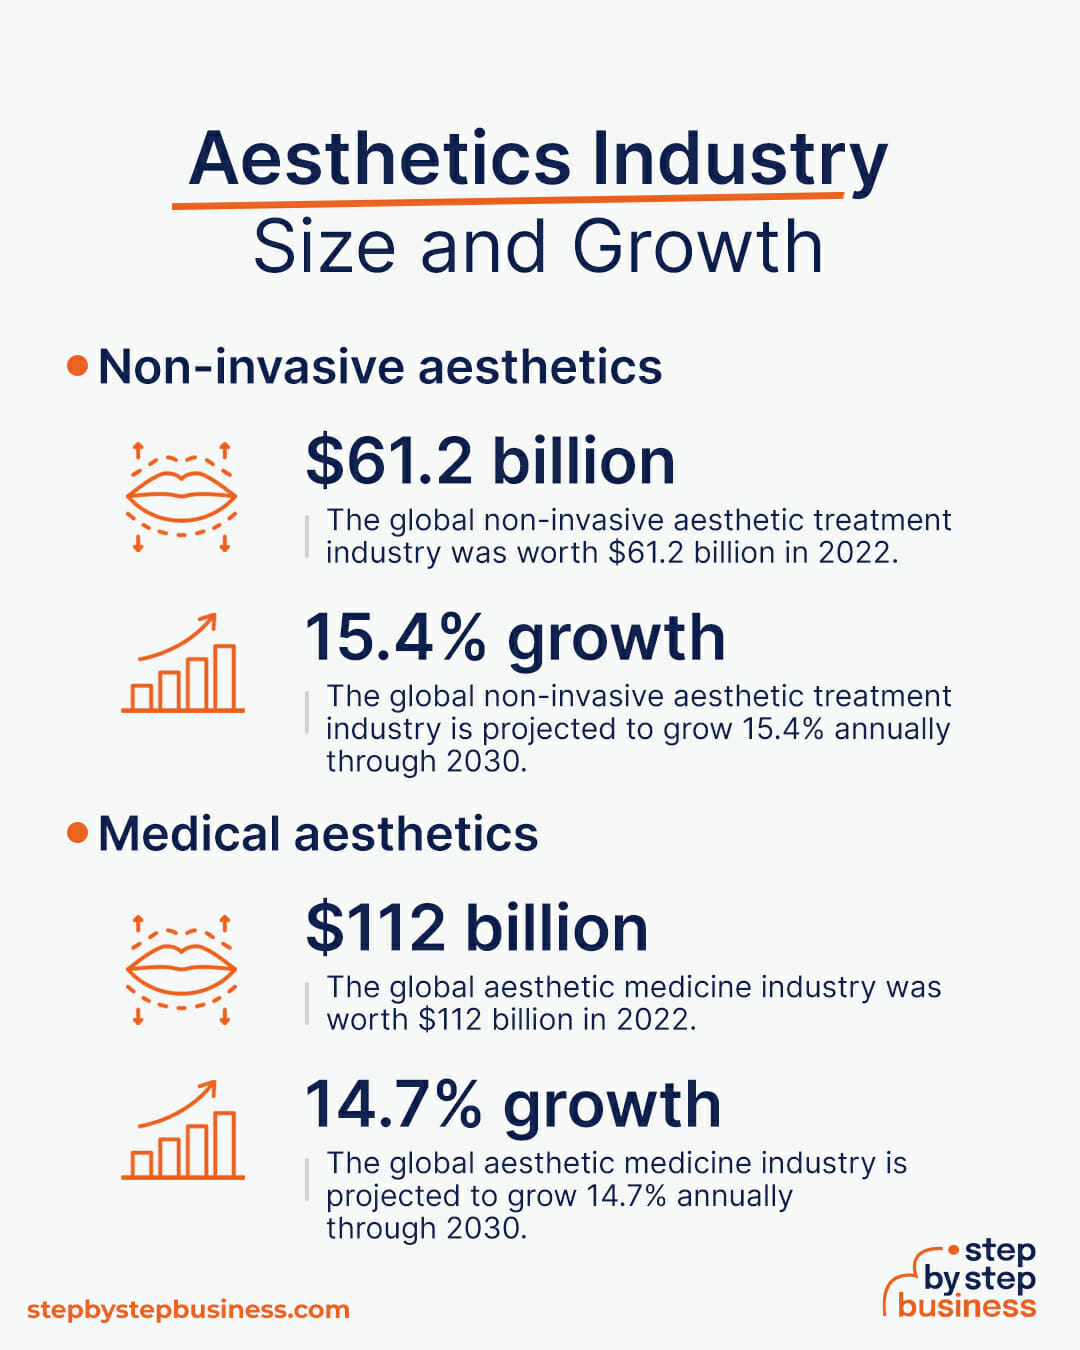 Aesthetics industry size and growth